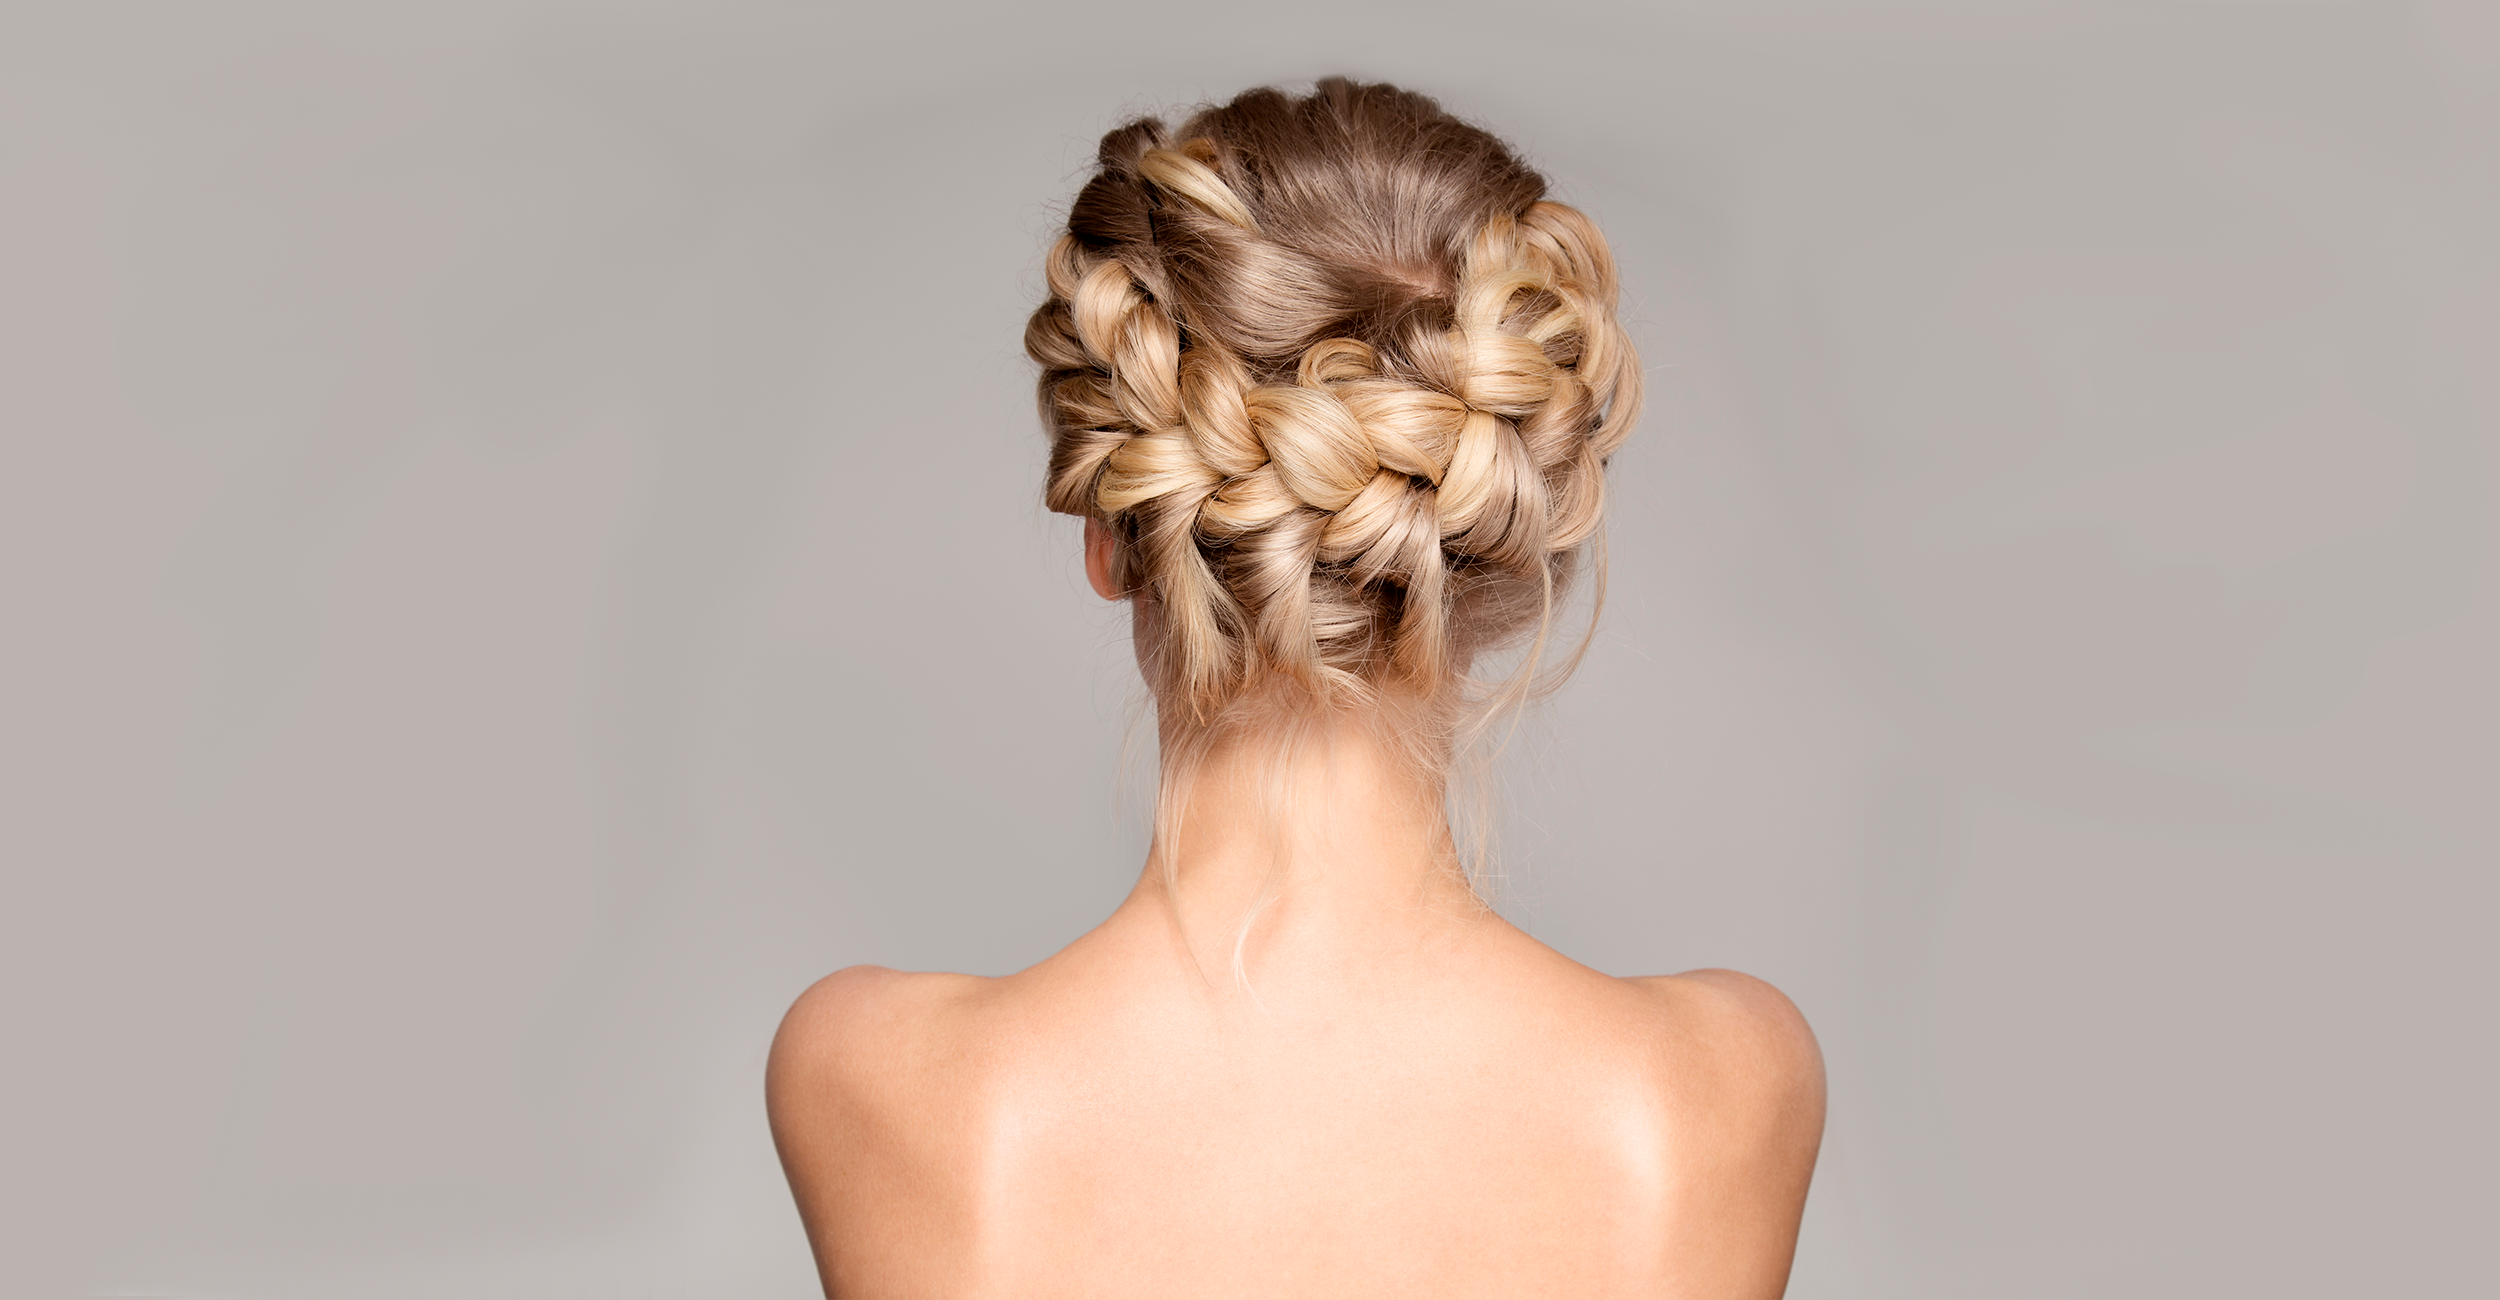 5 hairstyles for Christmas parties